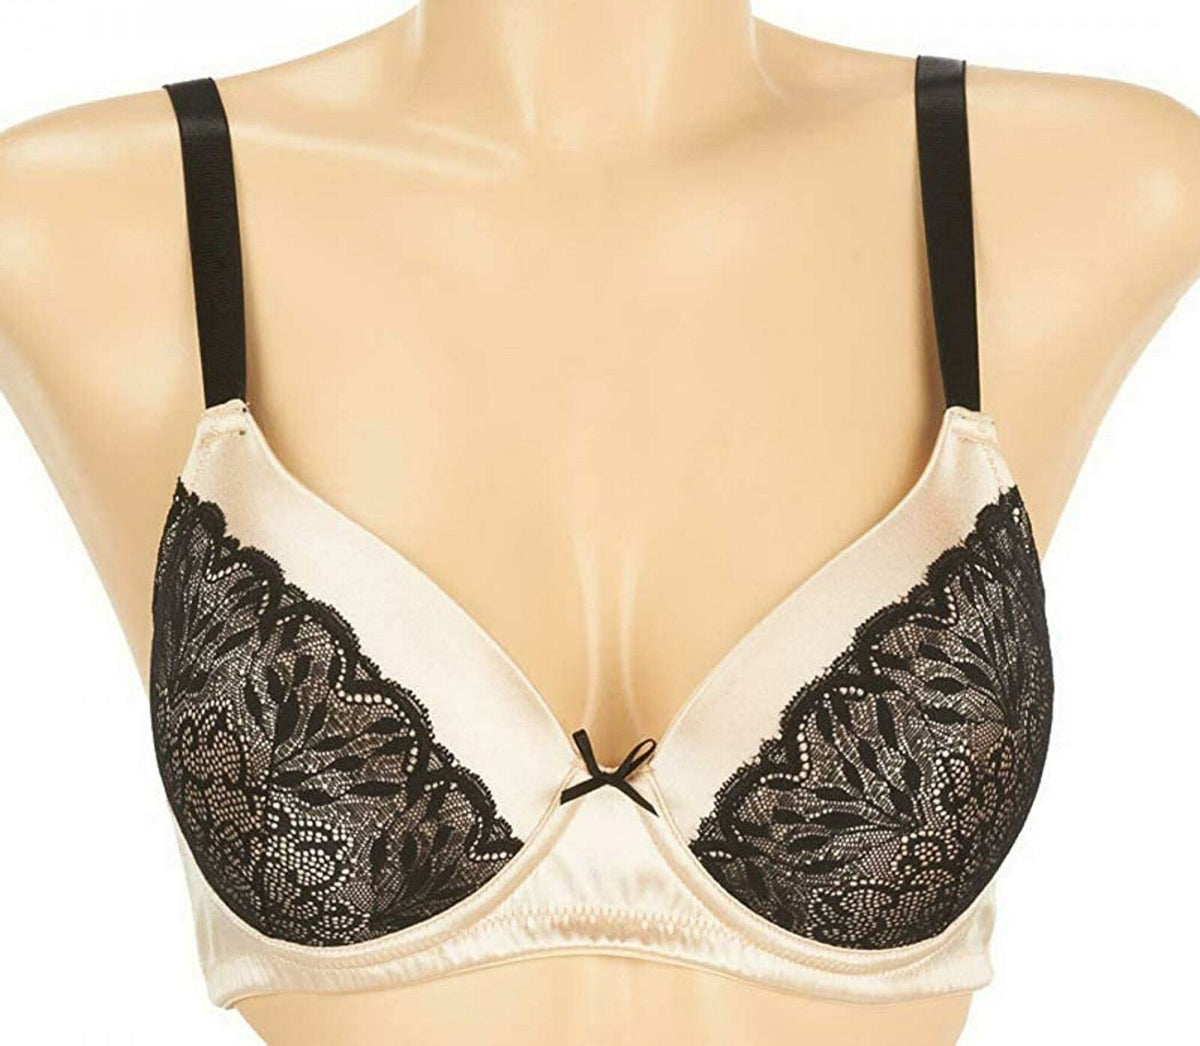 Breezies Set of 2 Soft Support Lace Wirefree Bras